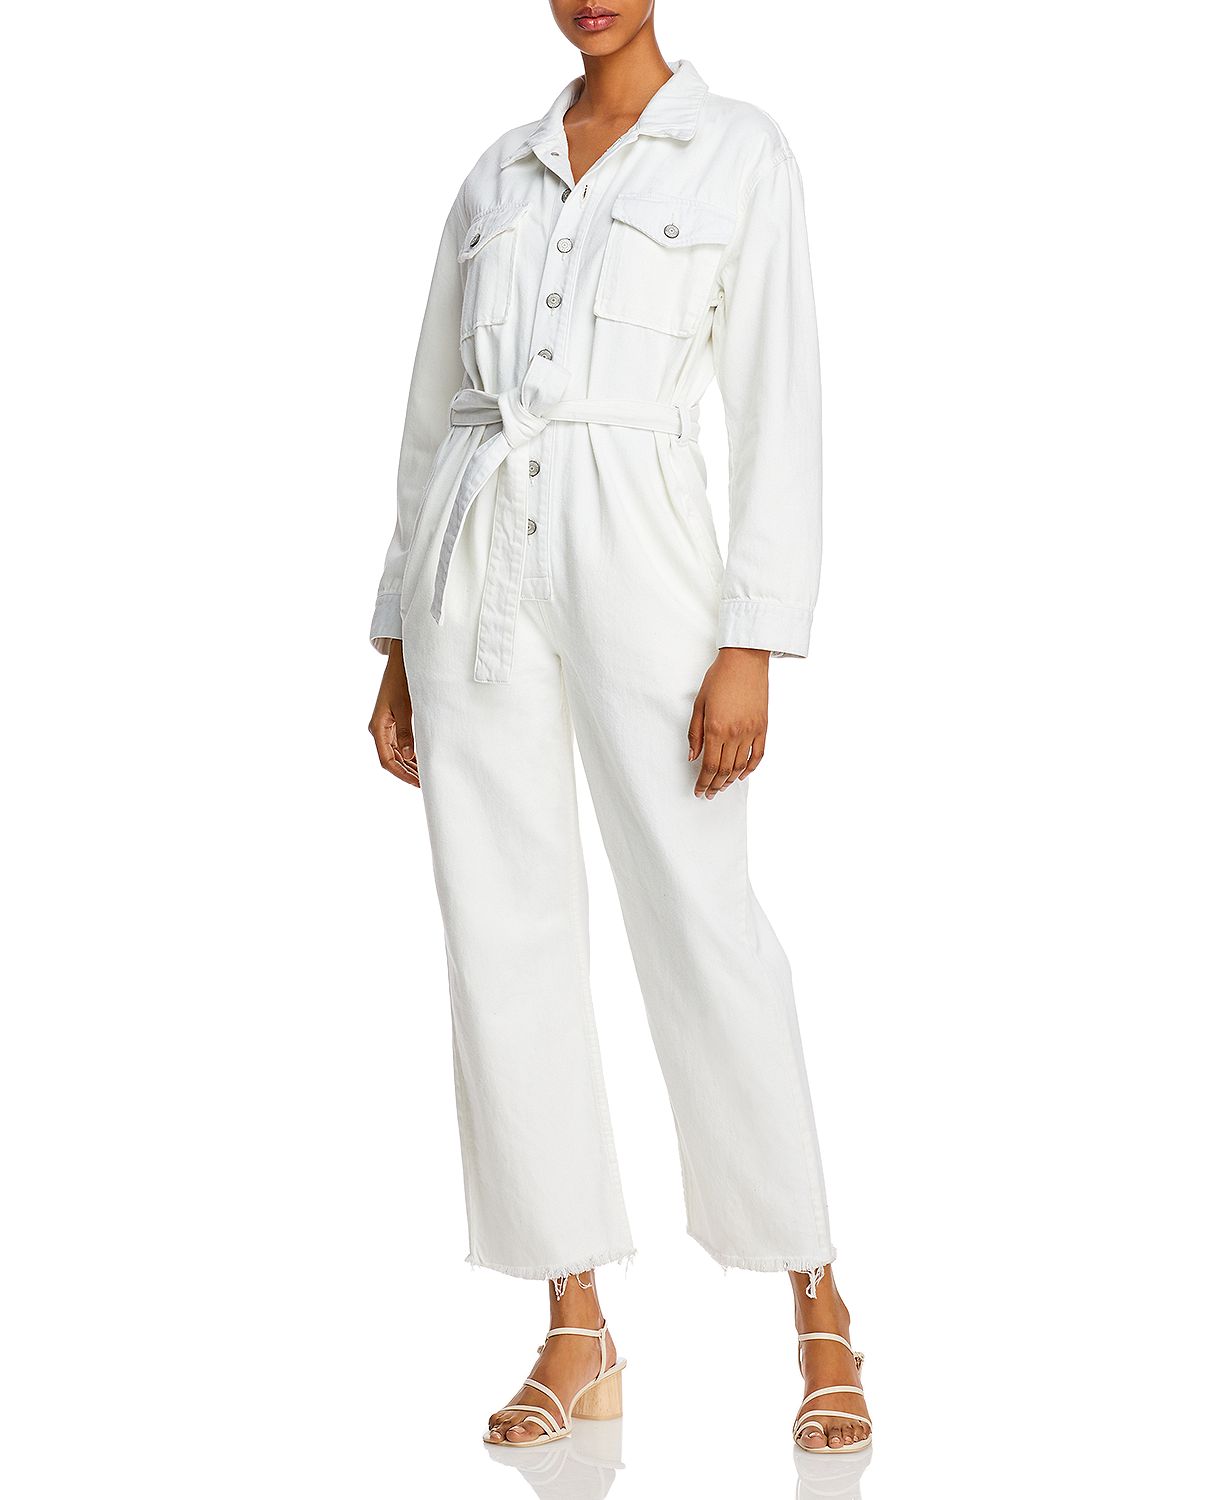 woocommerce-673321-2209615.cloudwaysapps.com-boyish-womens-white-the-guy-belted-frayed-hem-coveralls-jumpsuit